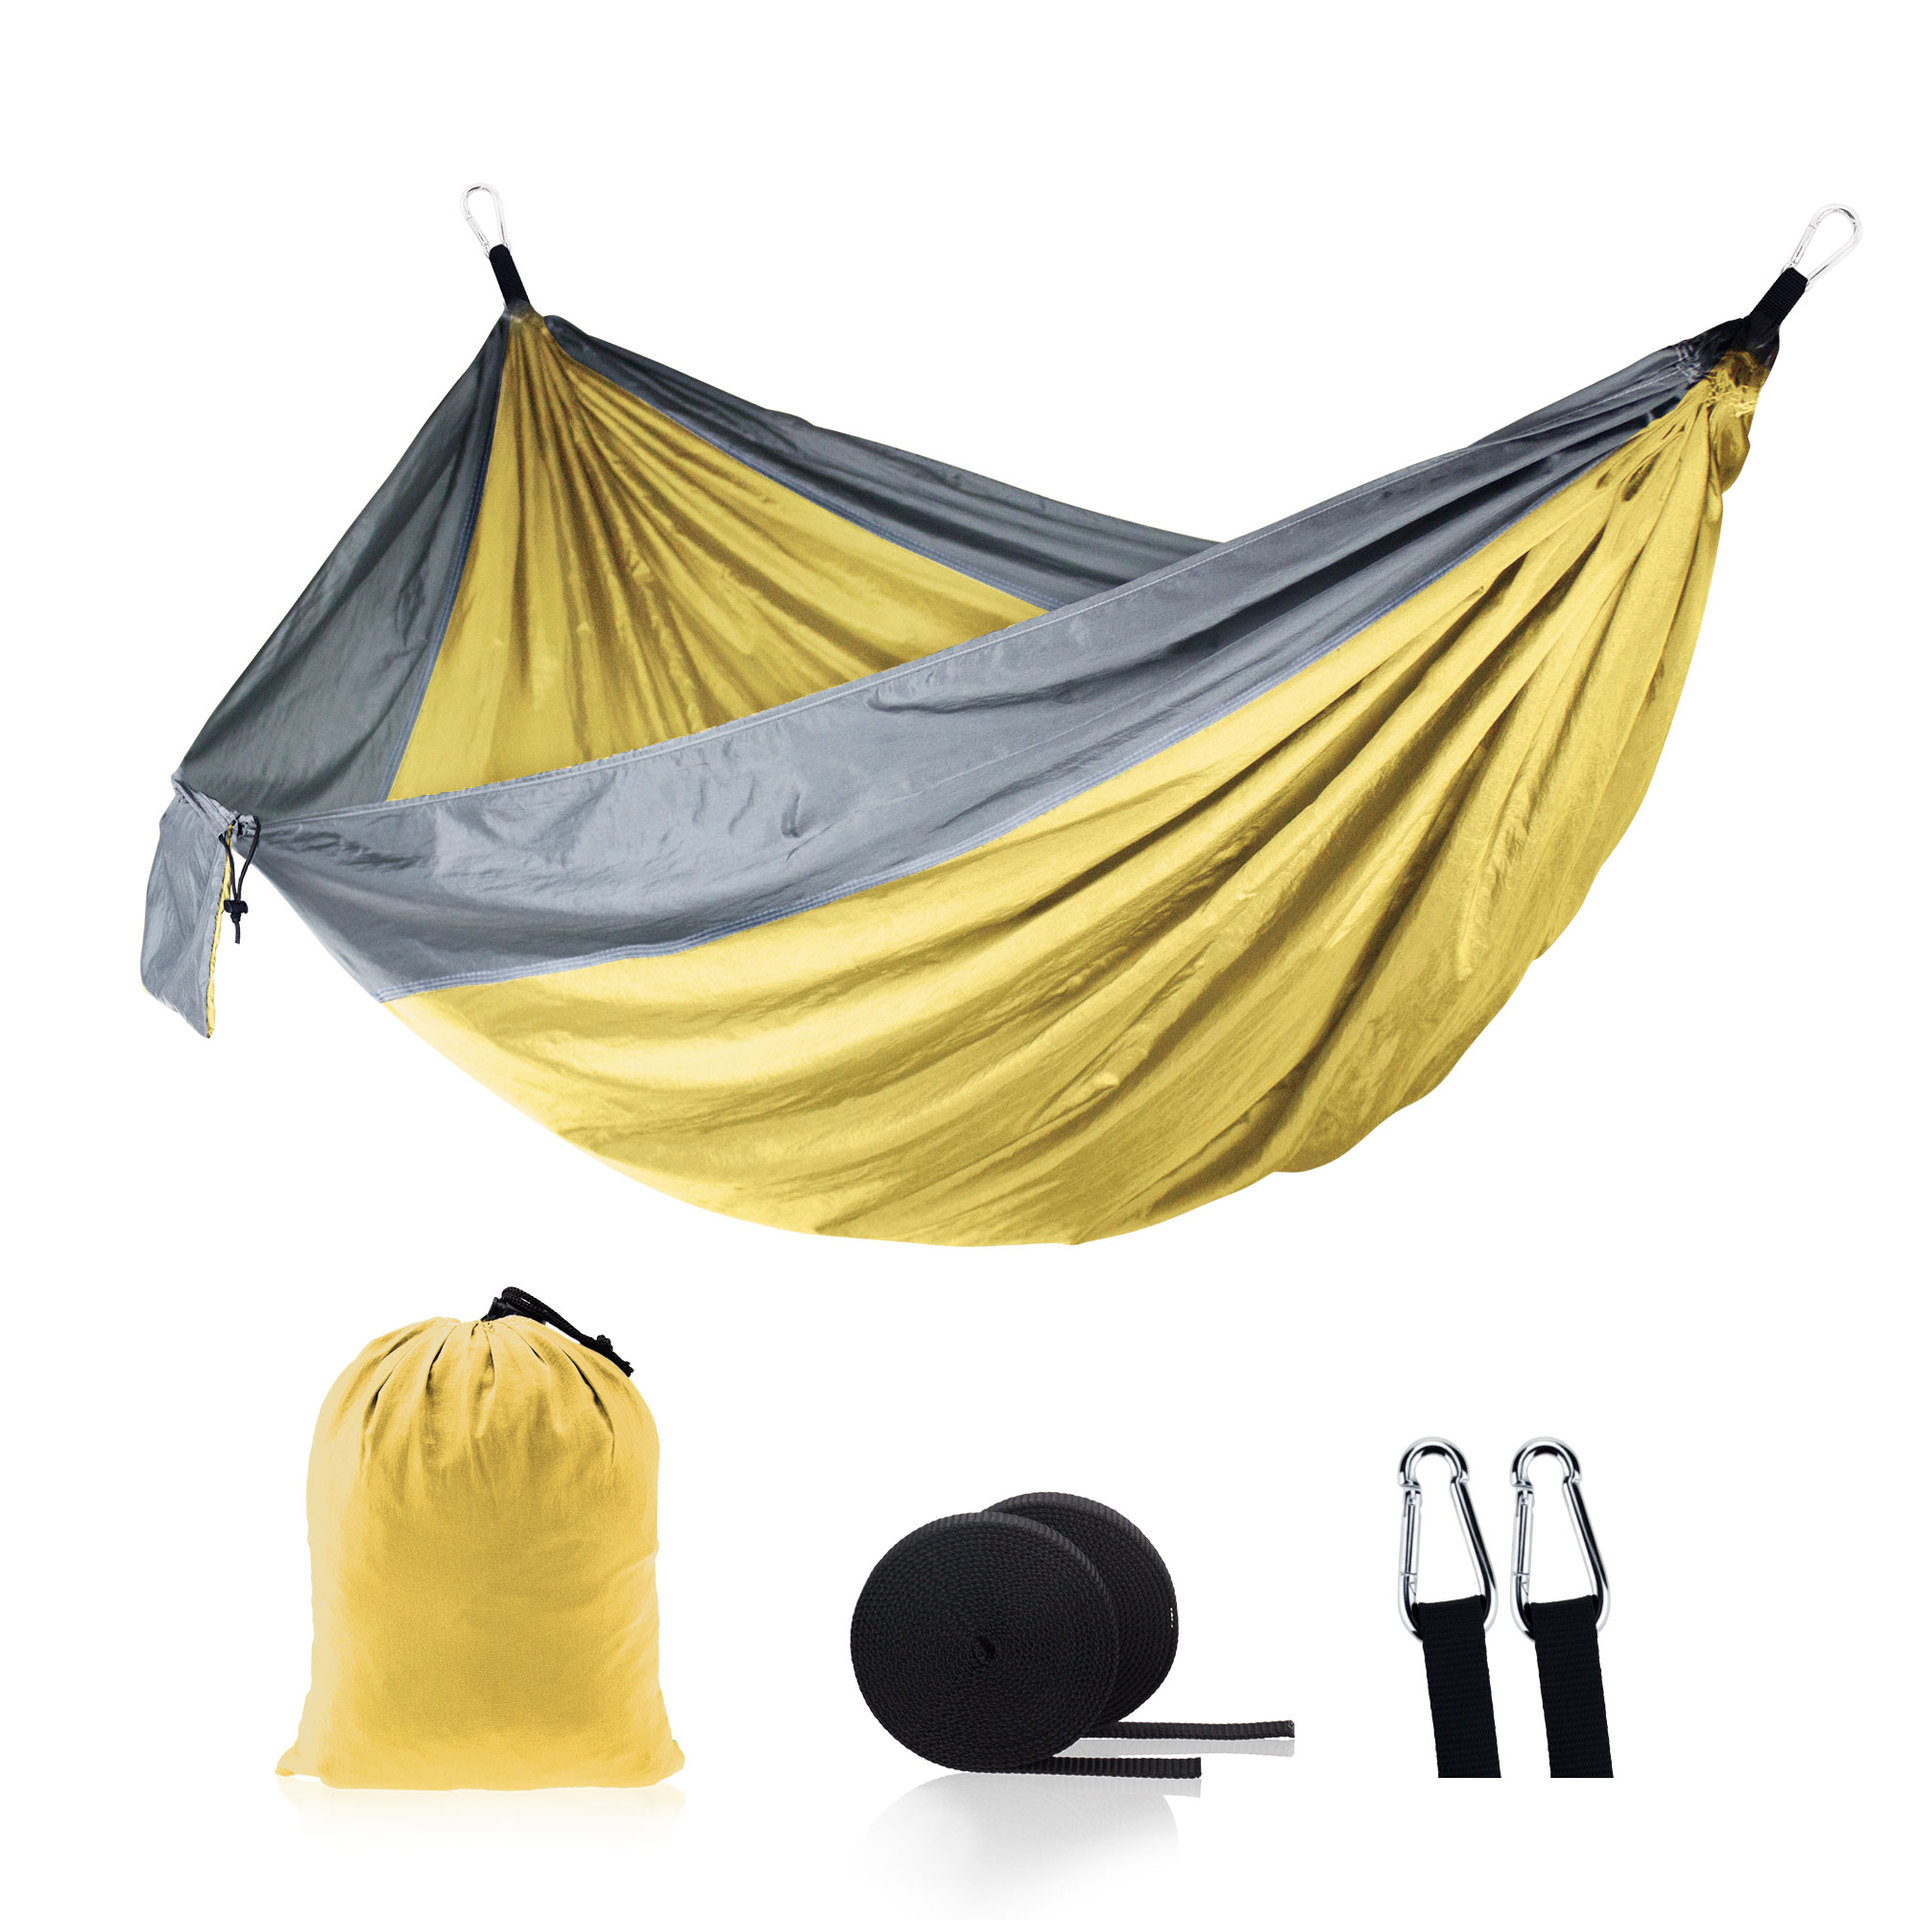 2022 Manufacturer LOW MOQ Custom Logo Camping Hammock Double and Single 210T Nylon Travel Lightweight Outdoors Camping Hammock